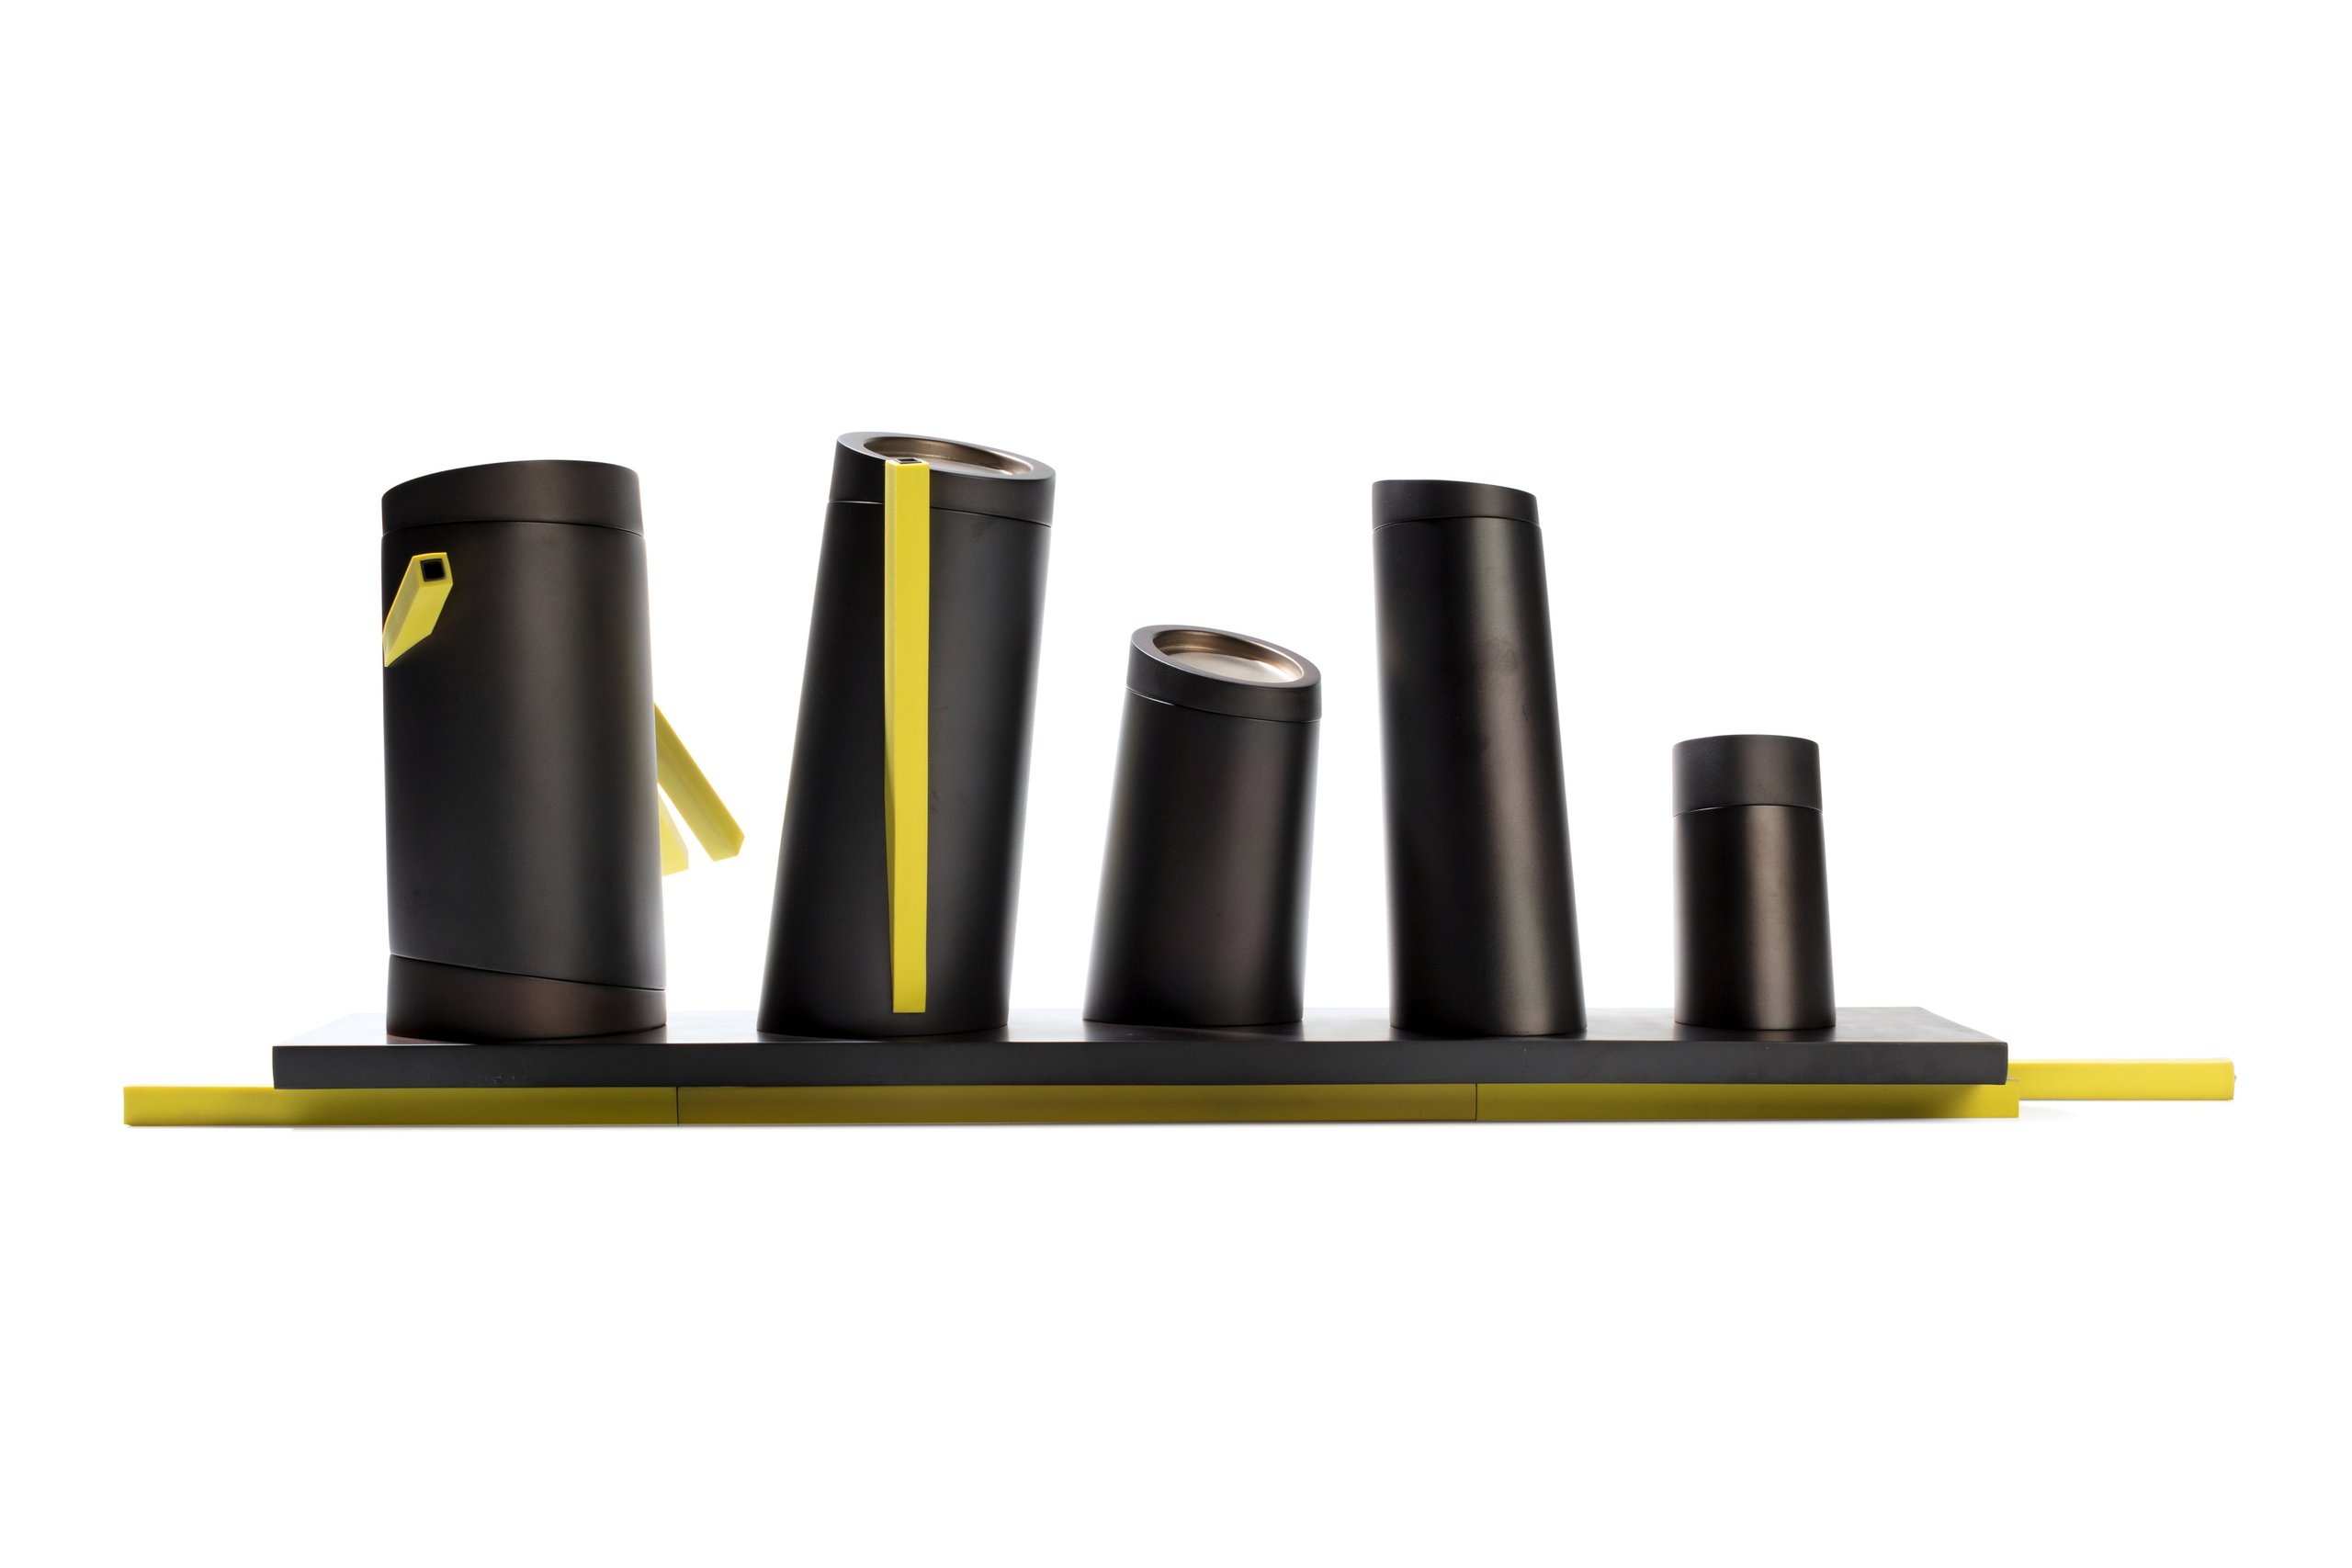 'Tea and Coffee Tower' designed by Denton Corker Marshall for Alessi